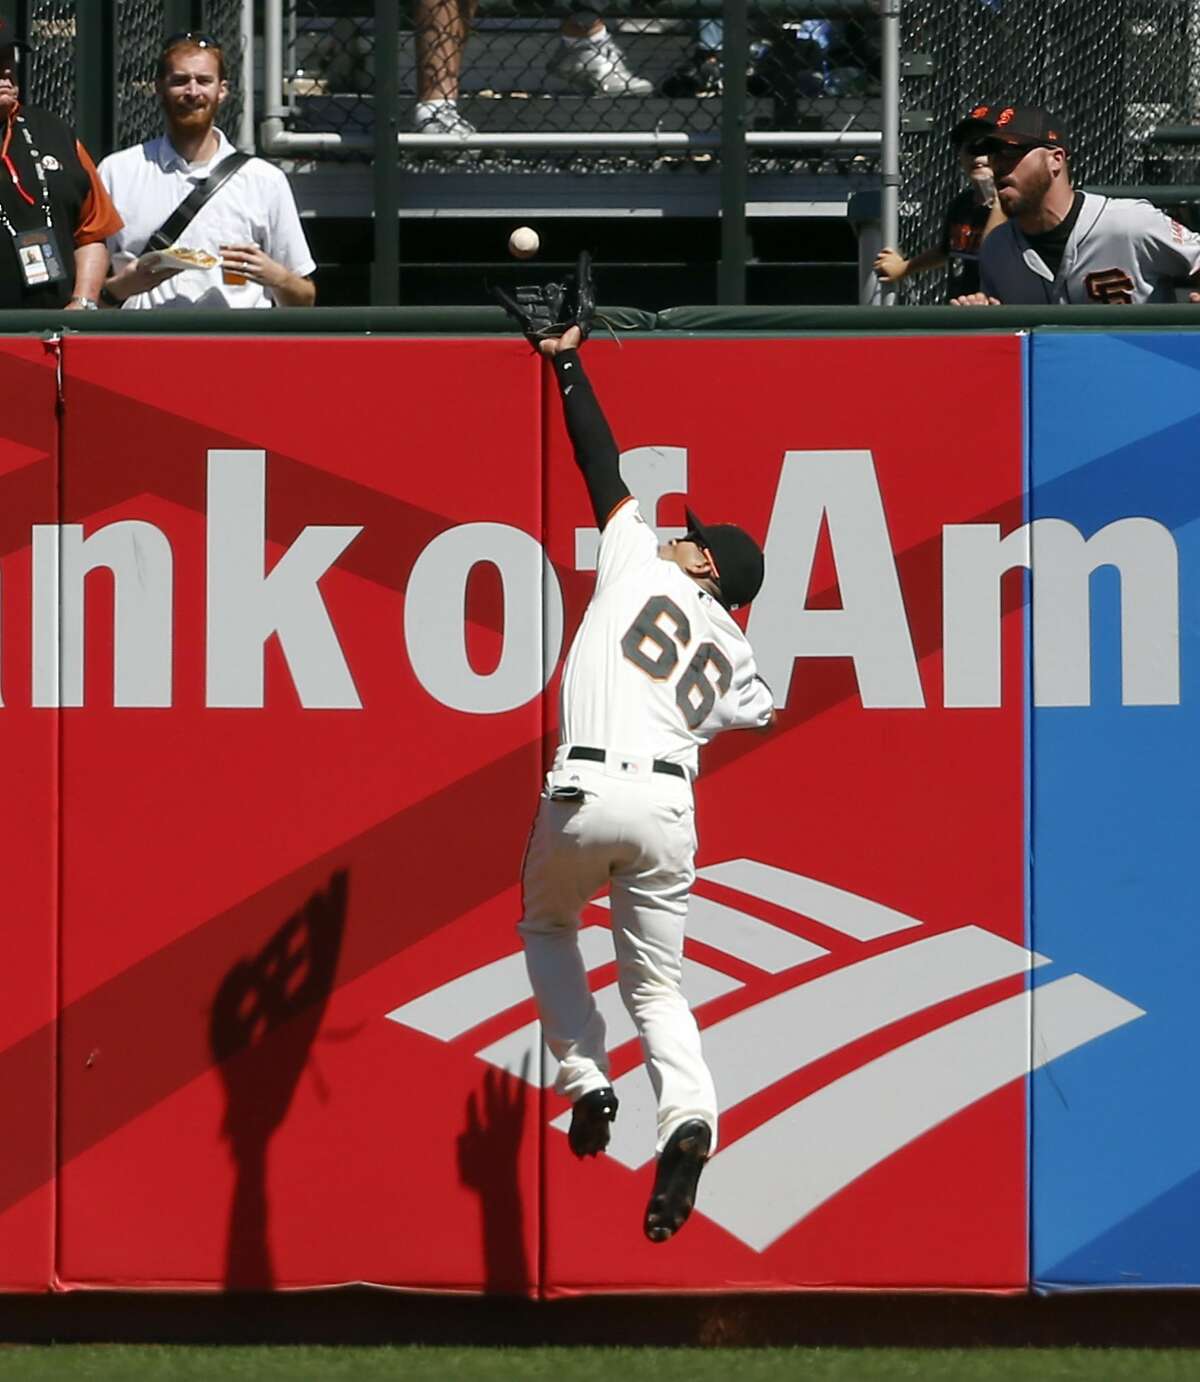 San Francisco Giants' Gorkys Hernandez catches a deep drive off the bat of Arizona Diamondbacks' Paul Goldschmidt in 6th inning during MLB game at AT&T Park in San Francisco, Calif., on Wednesday, August 31, 2016.